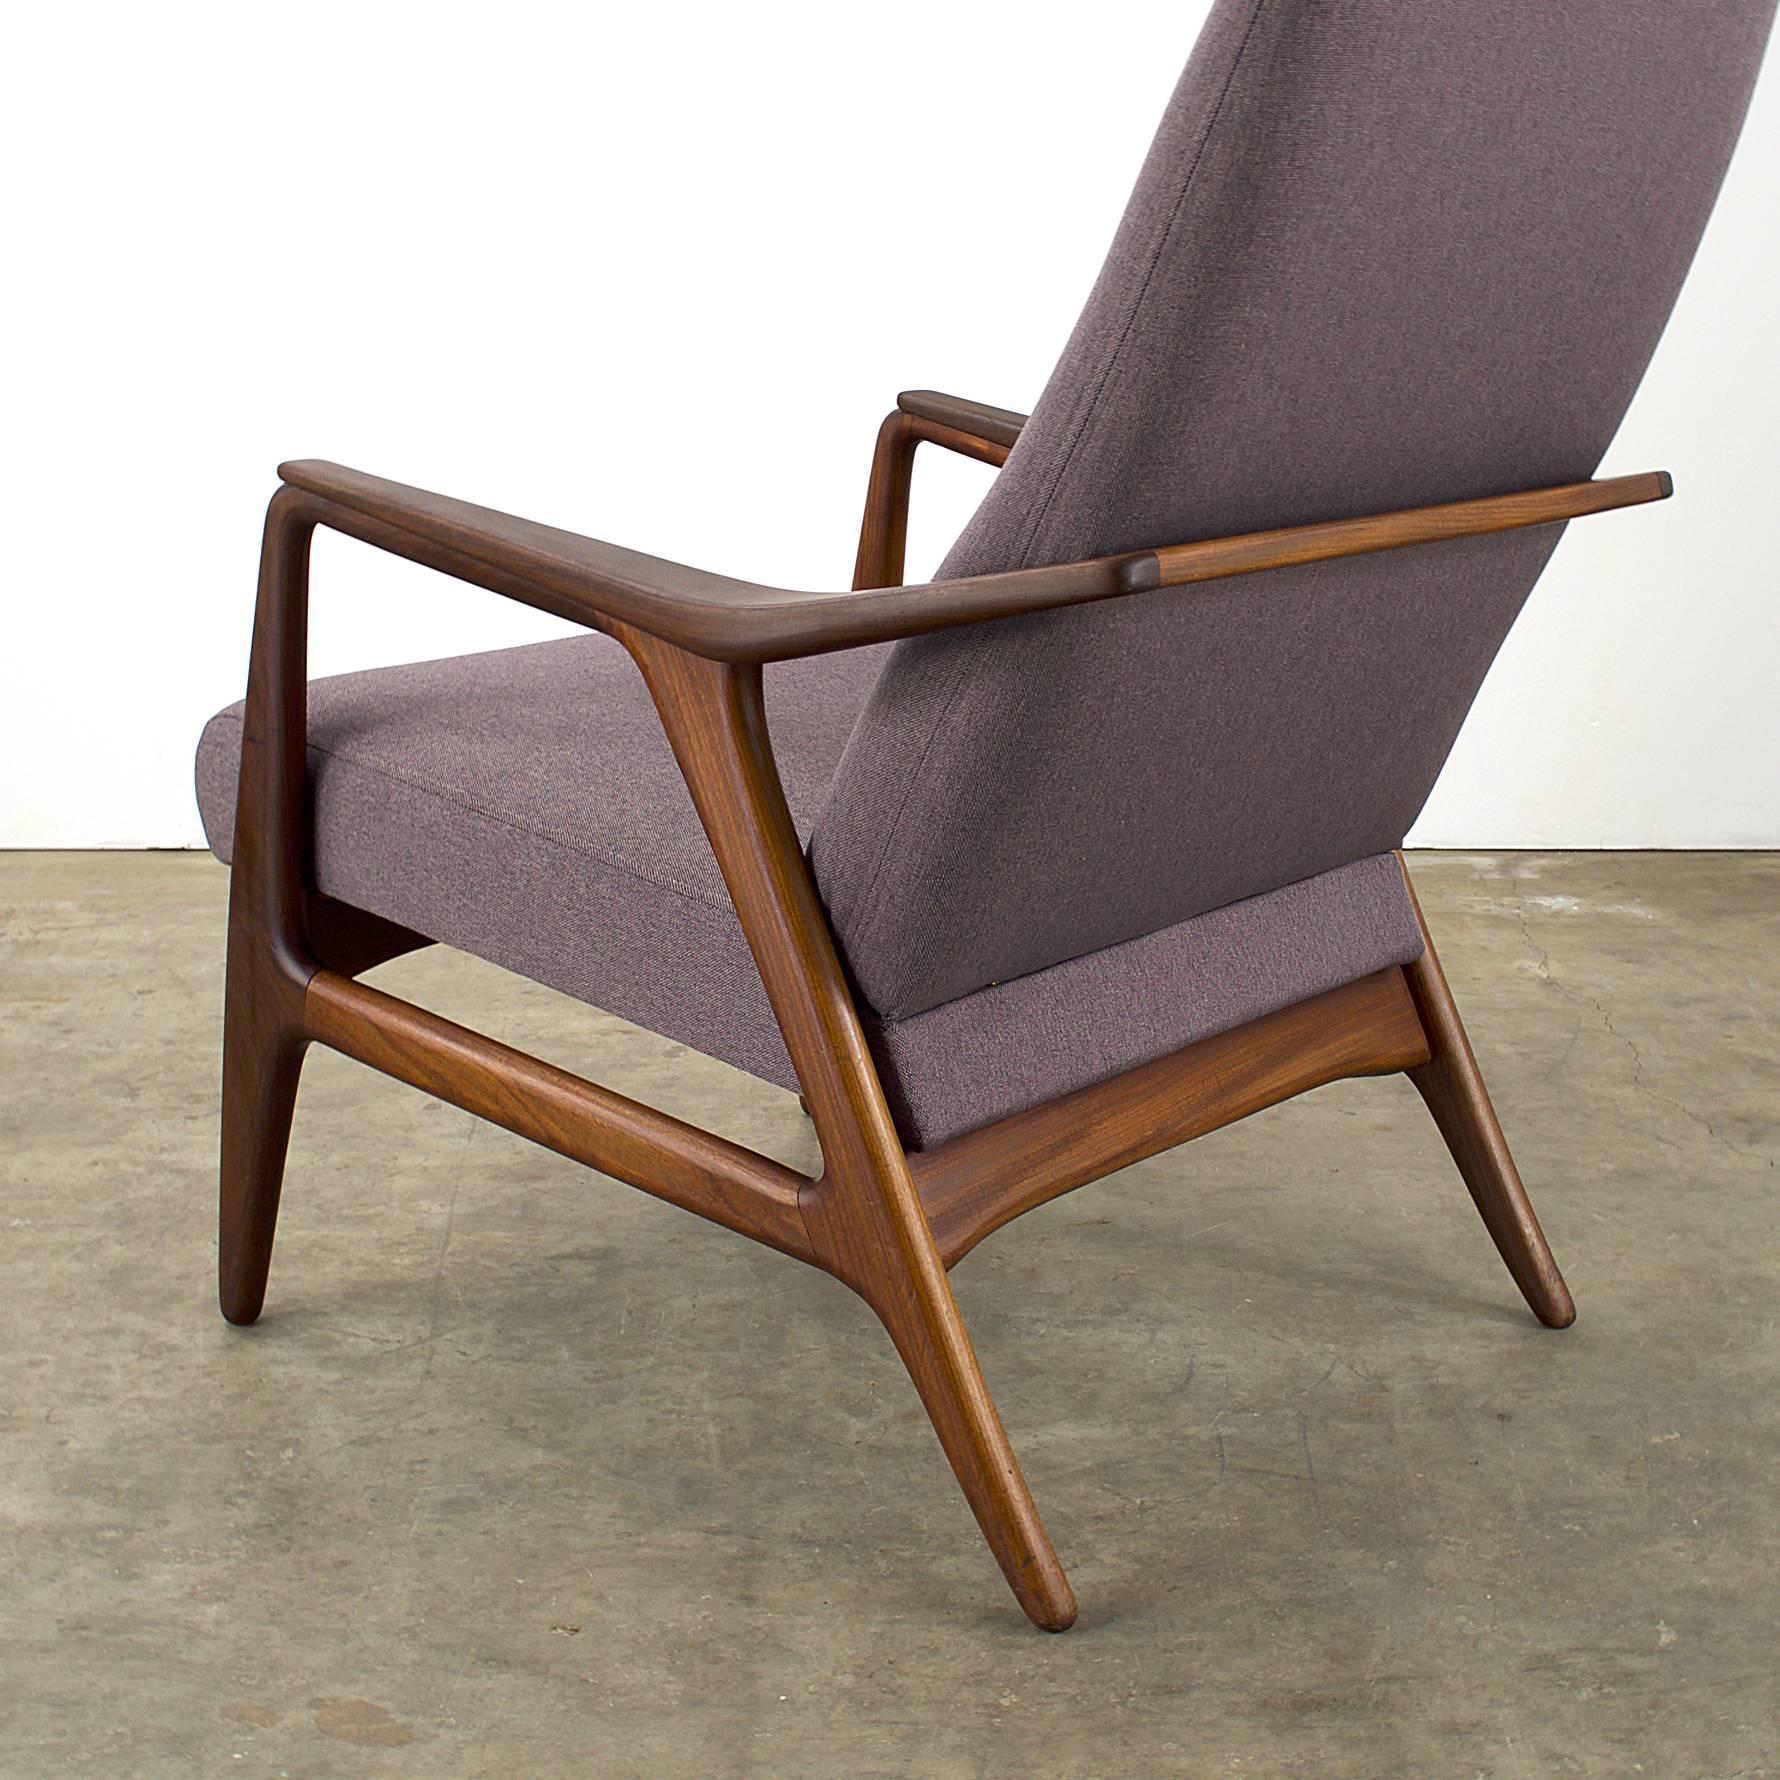 Danish Midcentury Teak Easy Chair / Fauteuil, Reupholstered For Sale